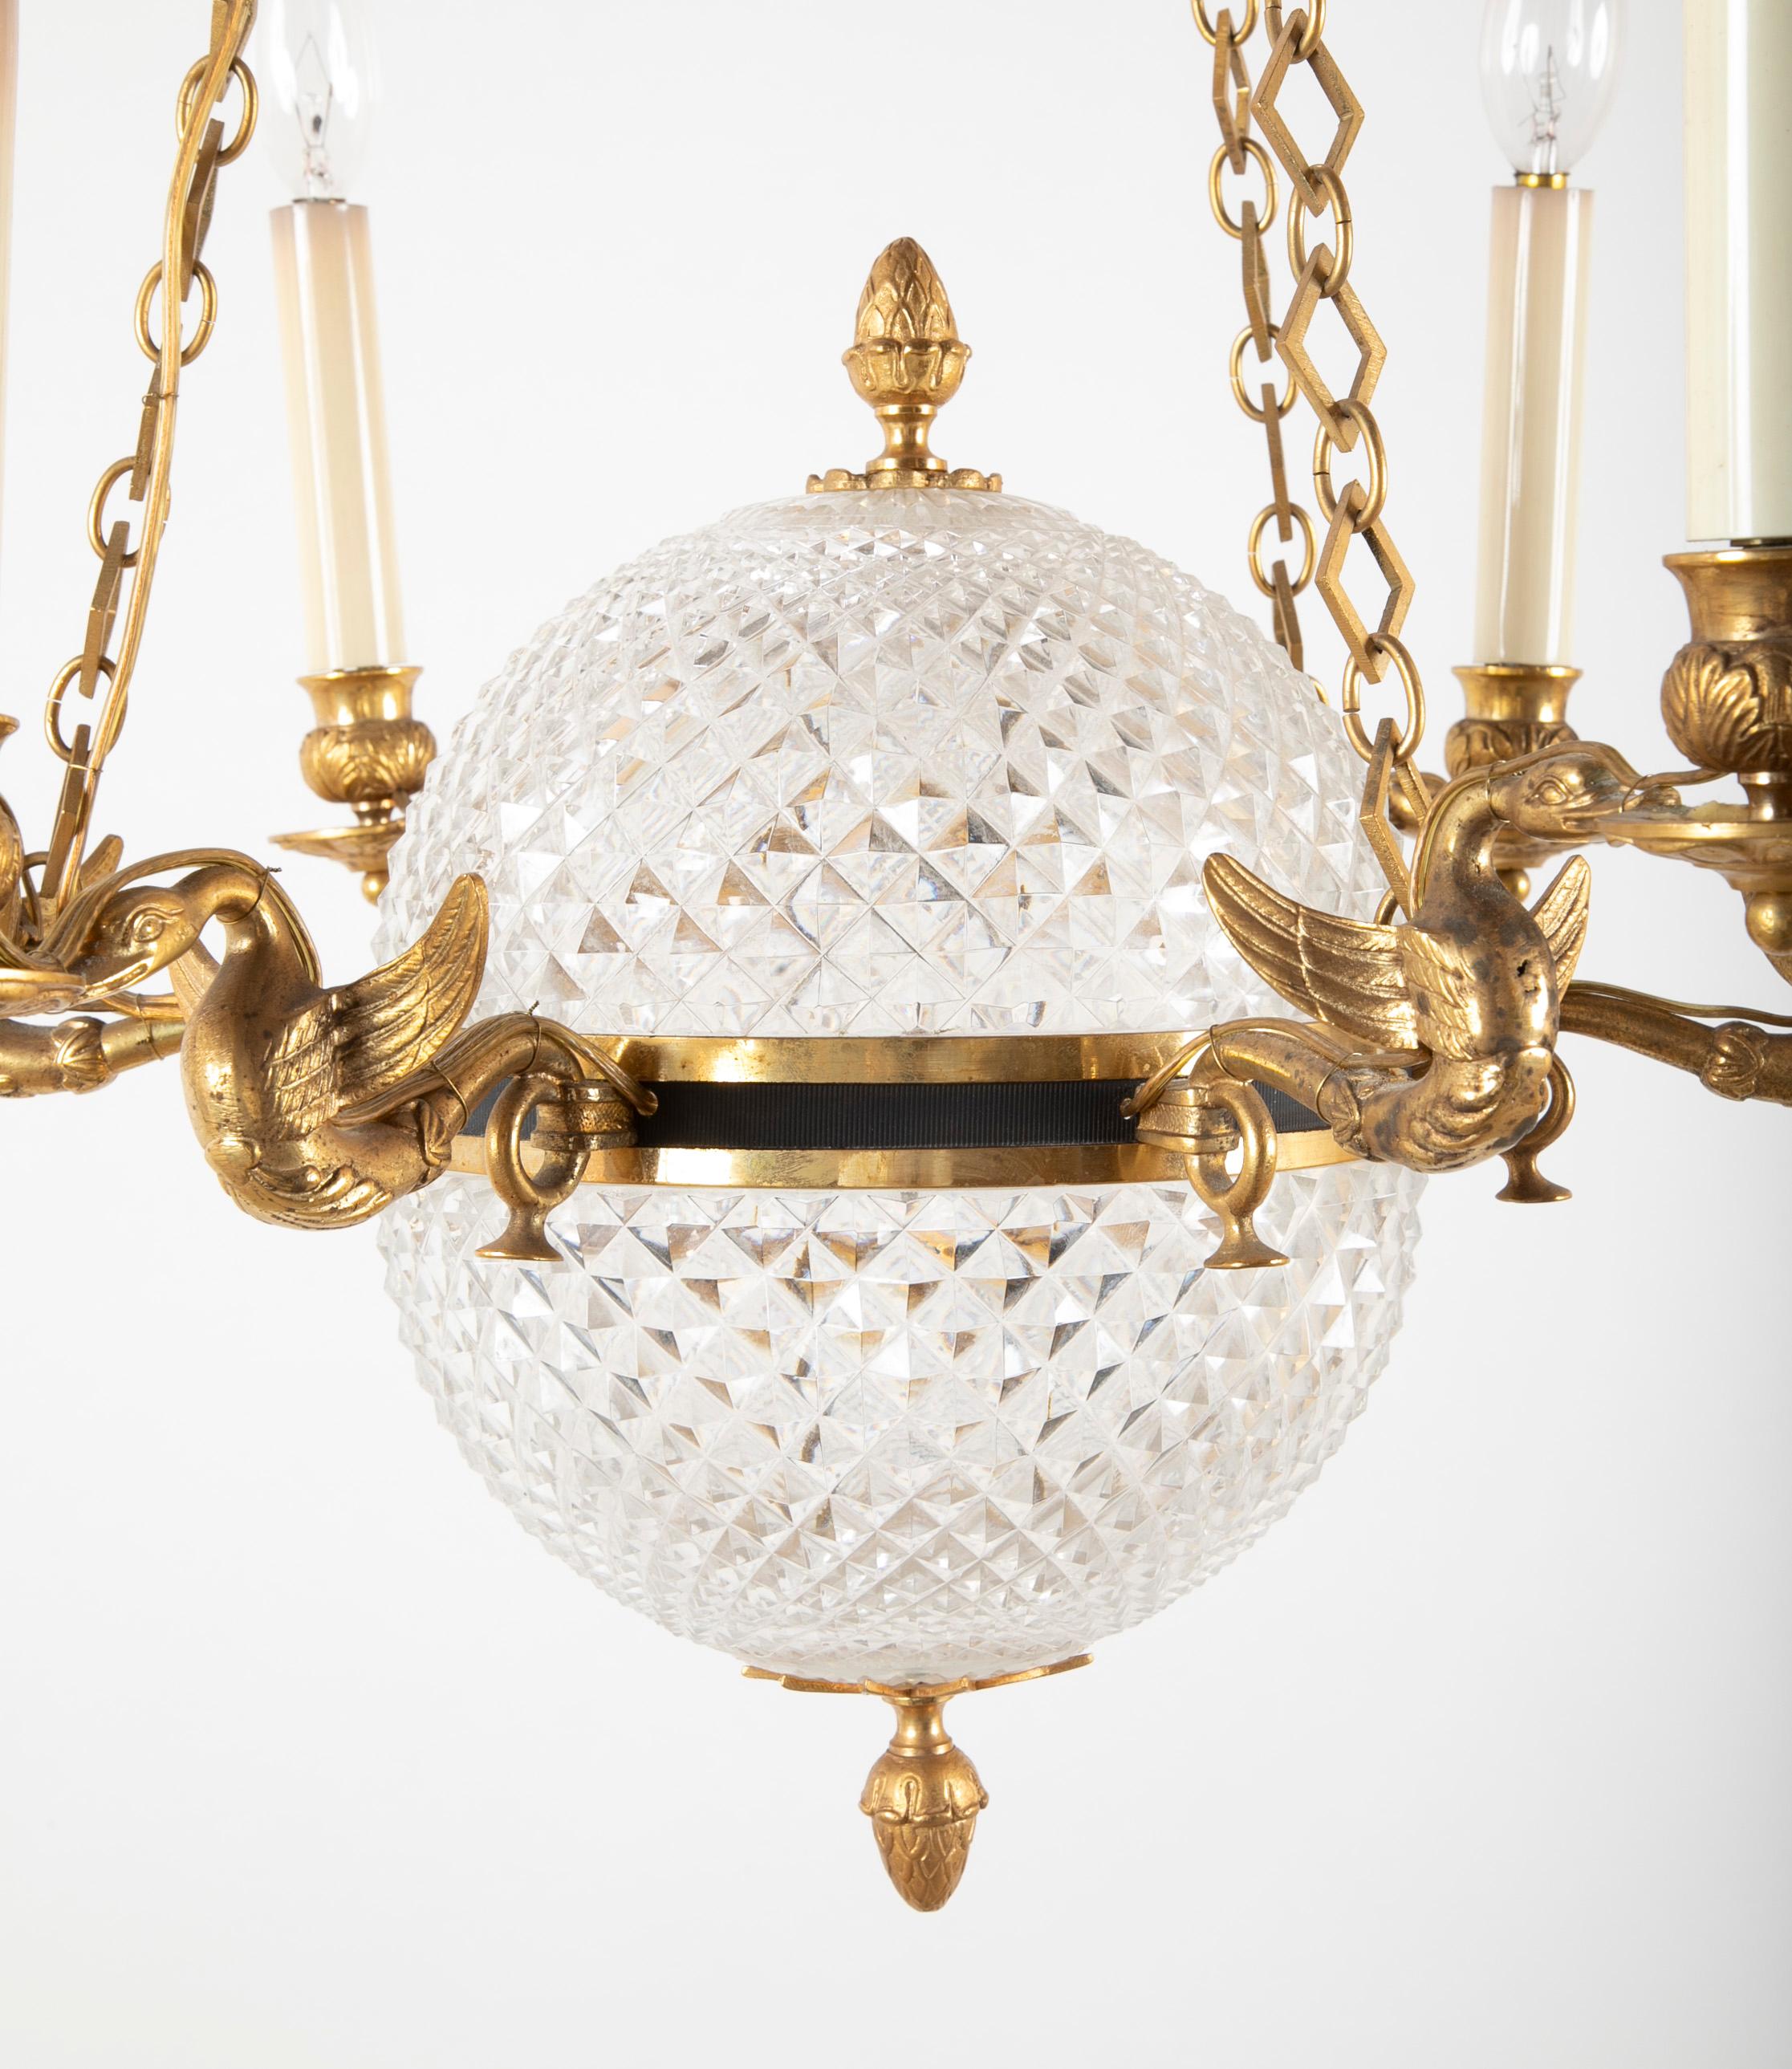 Cut Crystal Chandelier with Central Globe, Swan Arms and Elaborate Crown 1